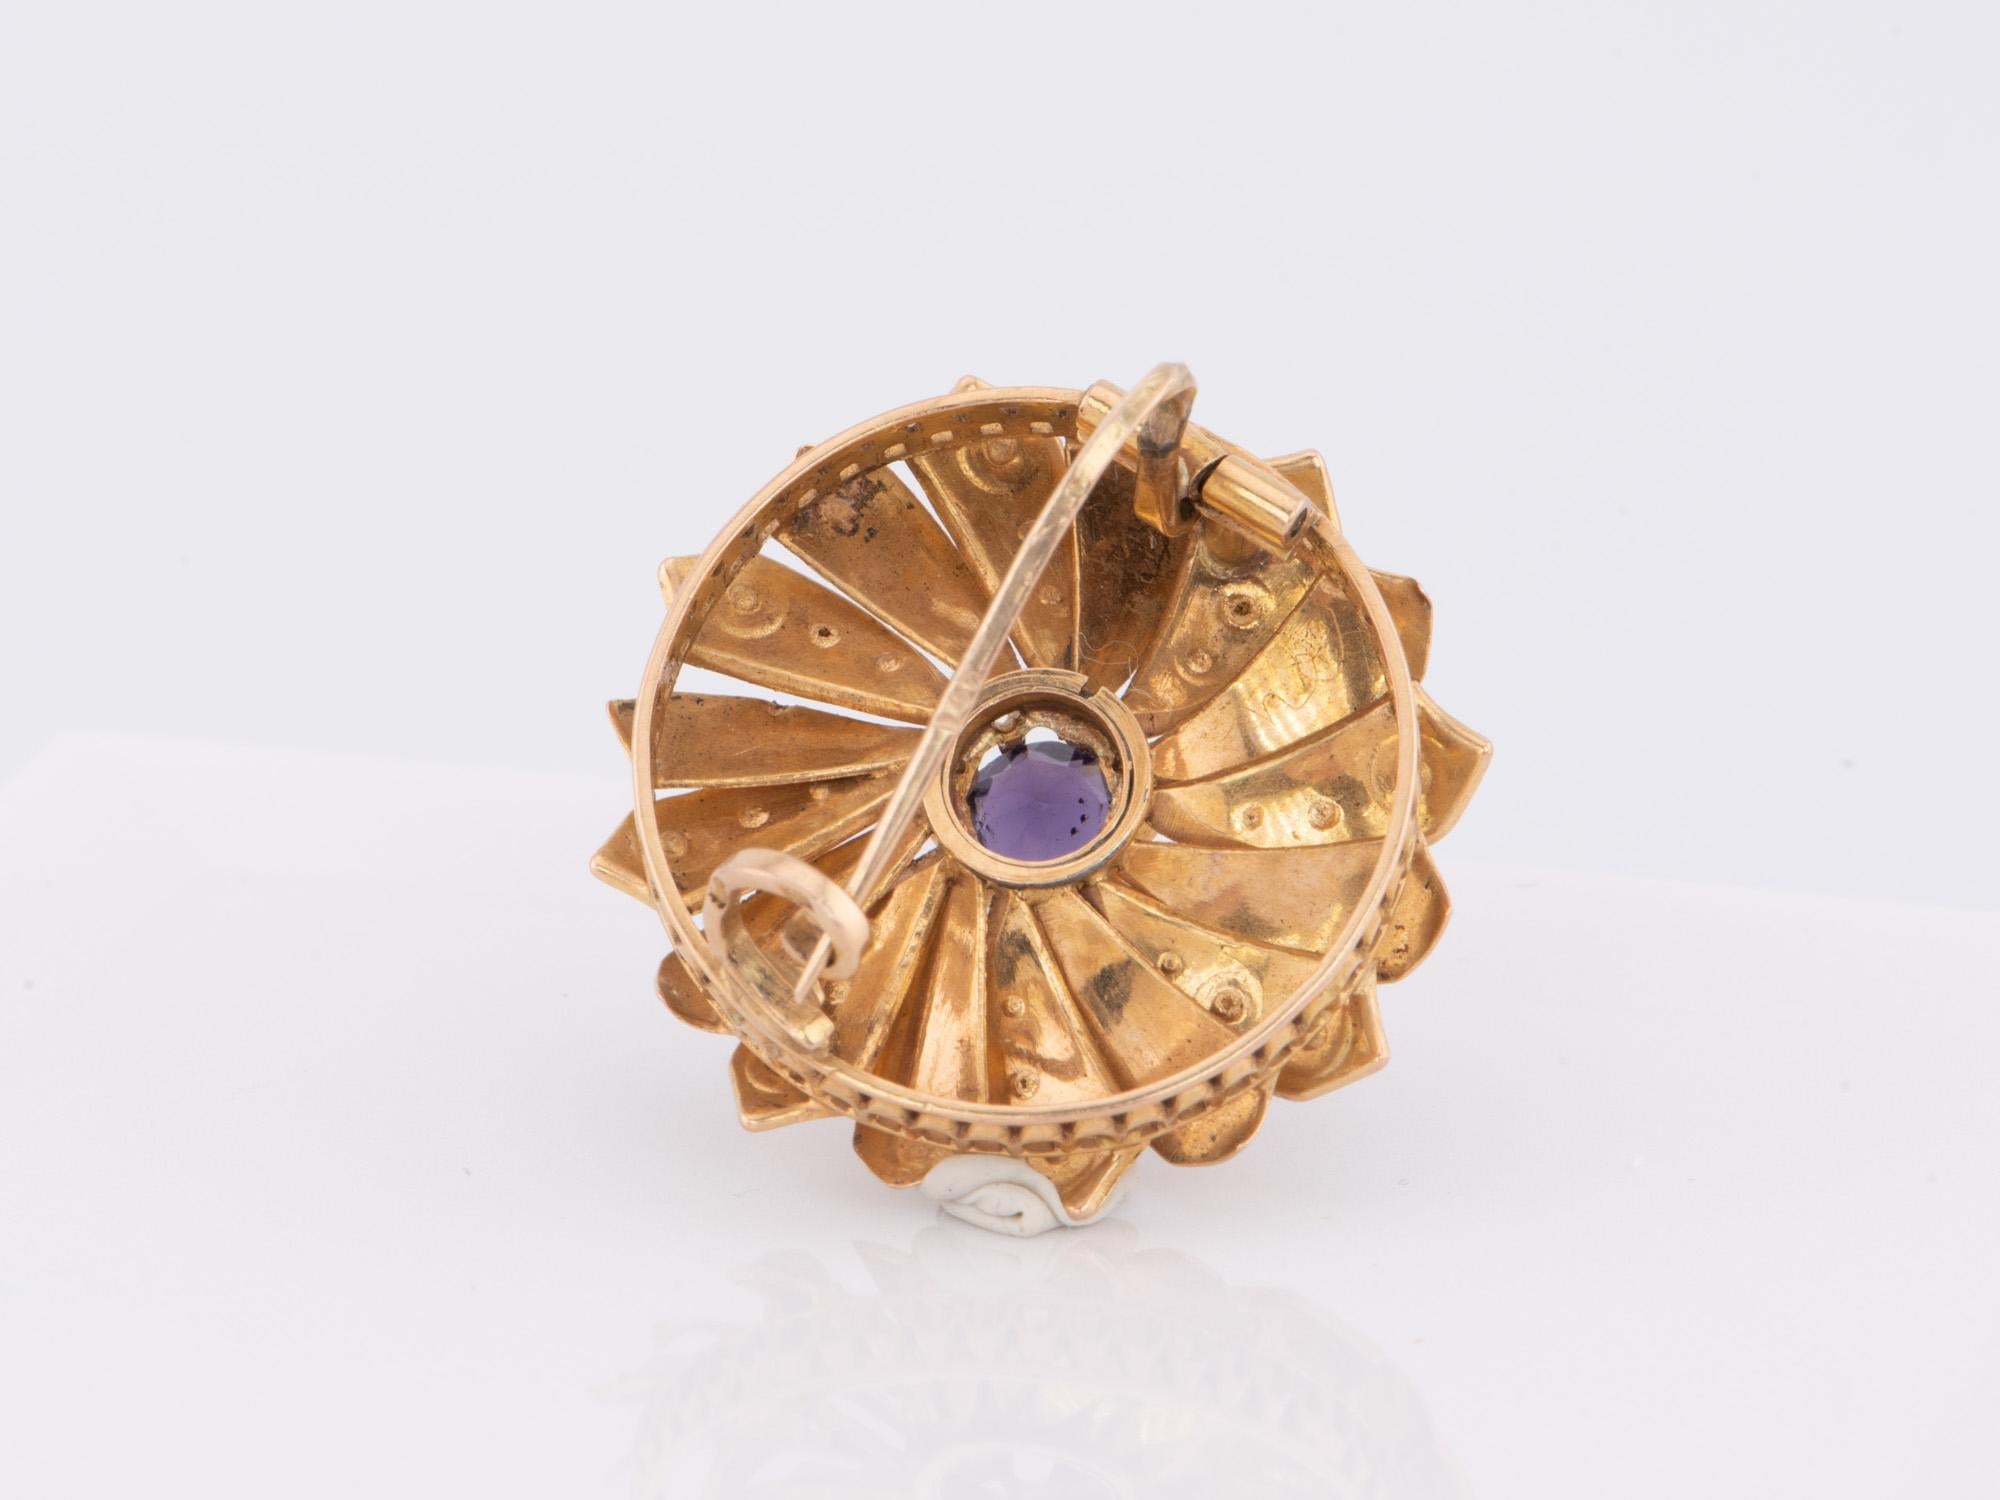 Uncut Vintage Amethyst and Seed Pearl Pendant 14K Gold Spiral Flower Brooch Pin V1021 For Sale